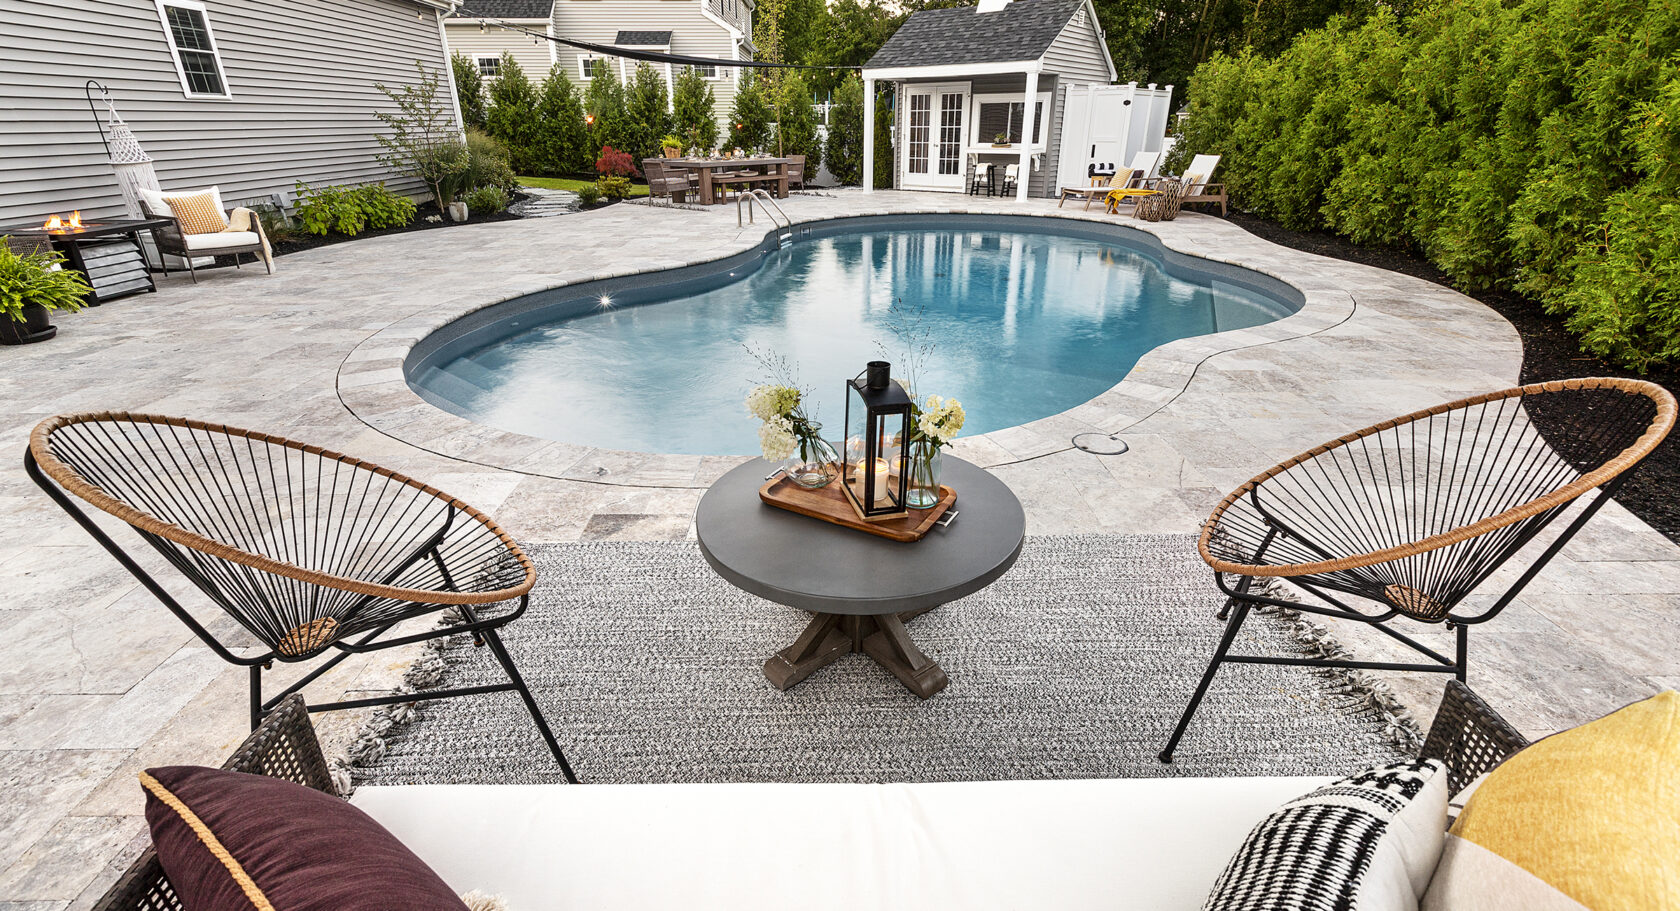 Pool deck lounge area at Dex by Terra's residential hardscape design-build project in Shrewsbury, MA.